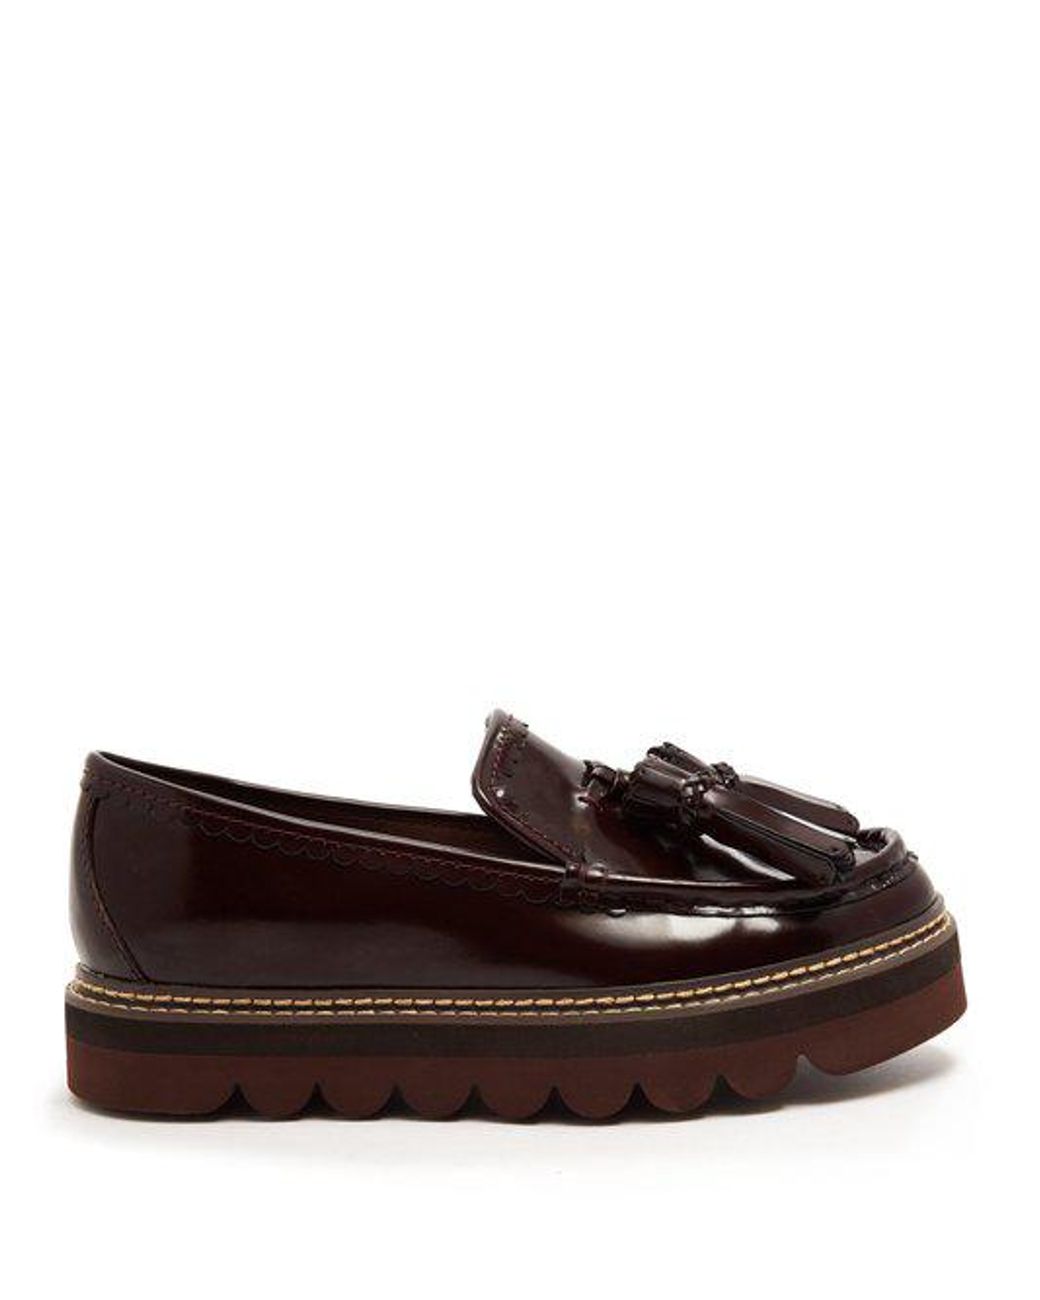 See By Chloé Tassel Platform Leather Loafers in Brown | Lyst